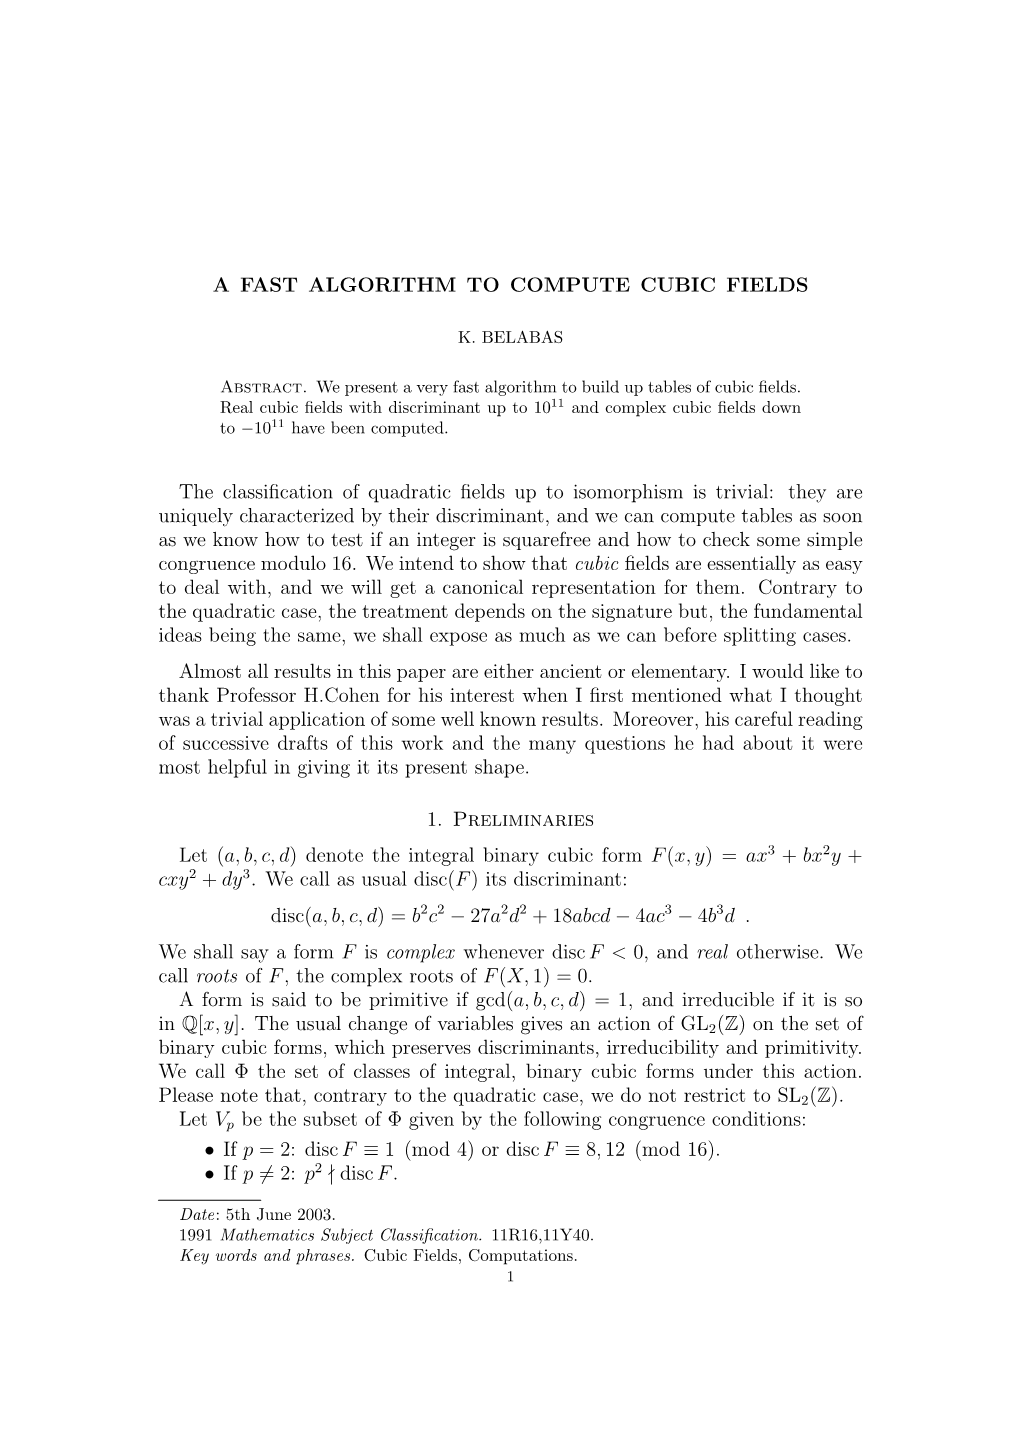 A FAST ALGORITHM to COMPUTE CUBIC FIELDS the Classification Of